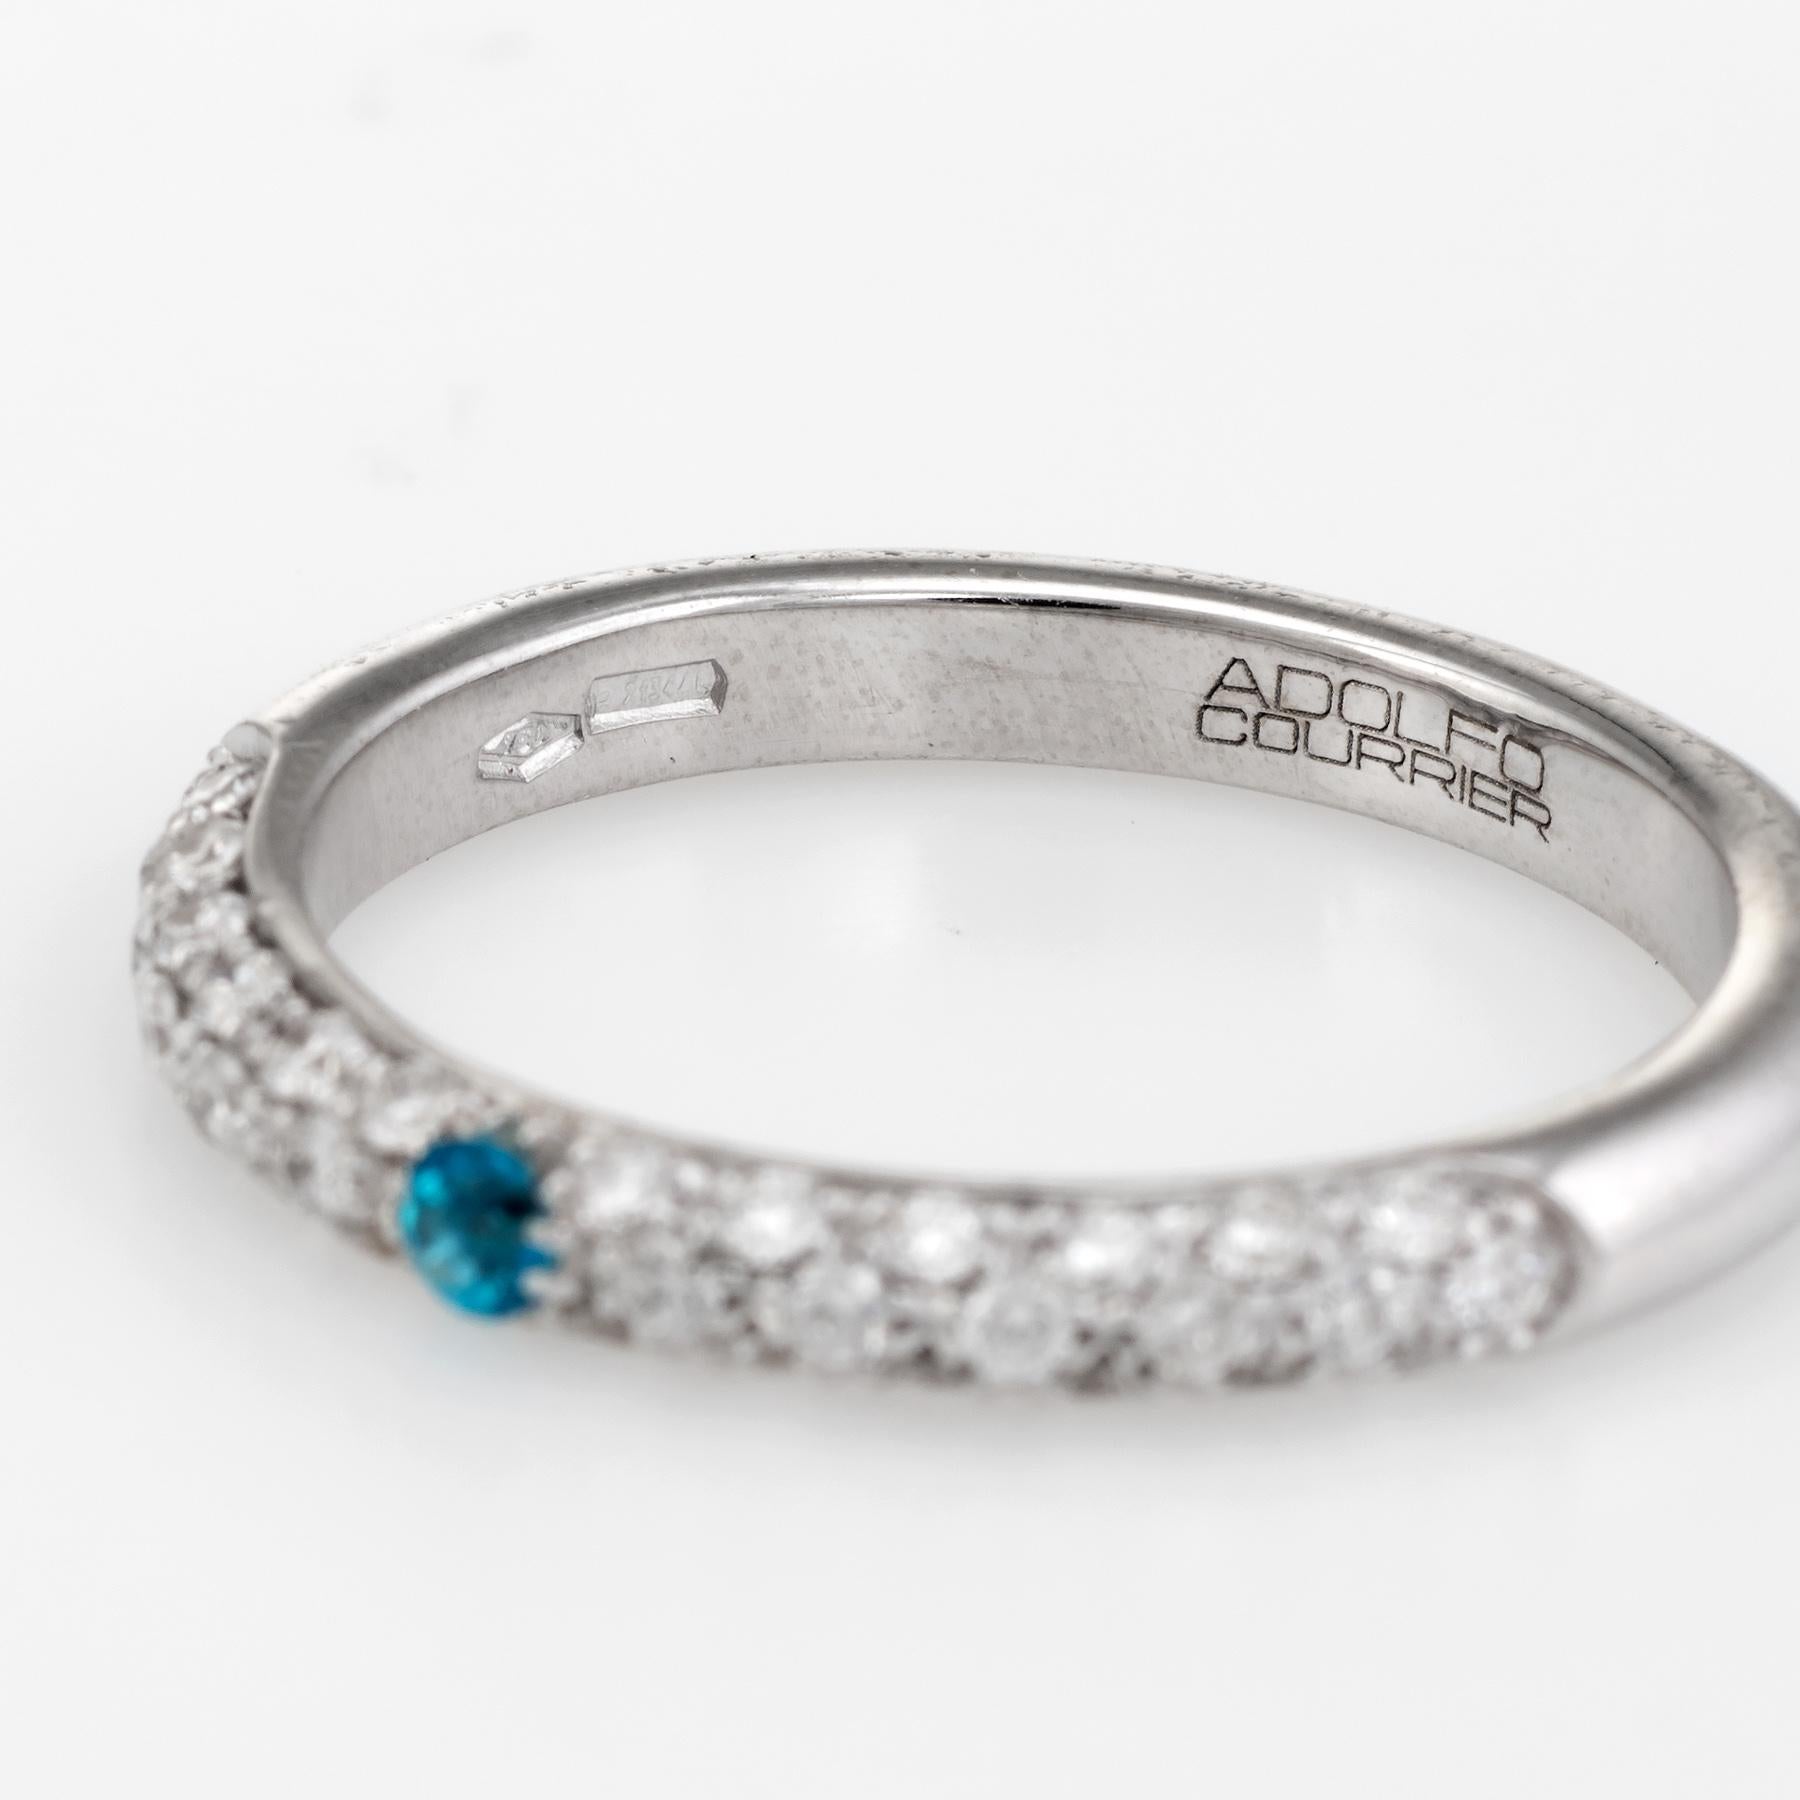 Adolfo Courrier Pave Turquoise Diamond Stacking Ring 18 Karat Gold Jewelry In Excellent Condition For Sale In Torrance, CA